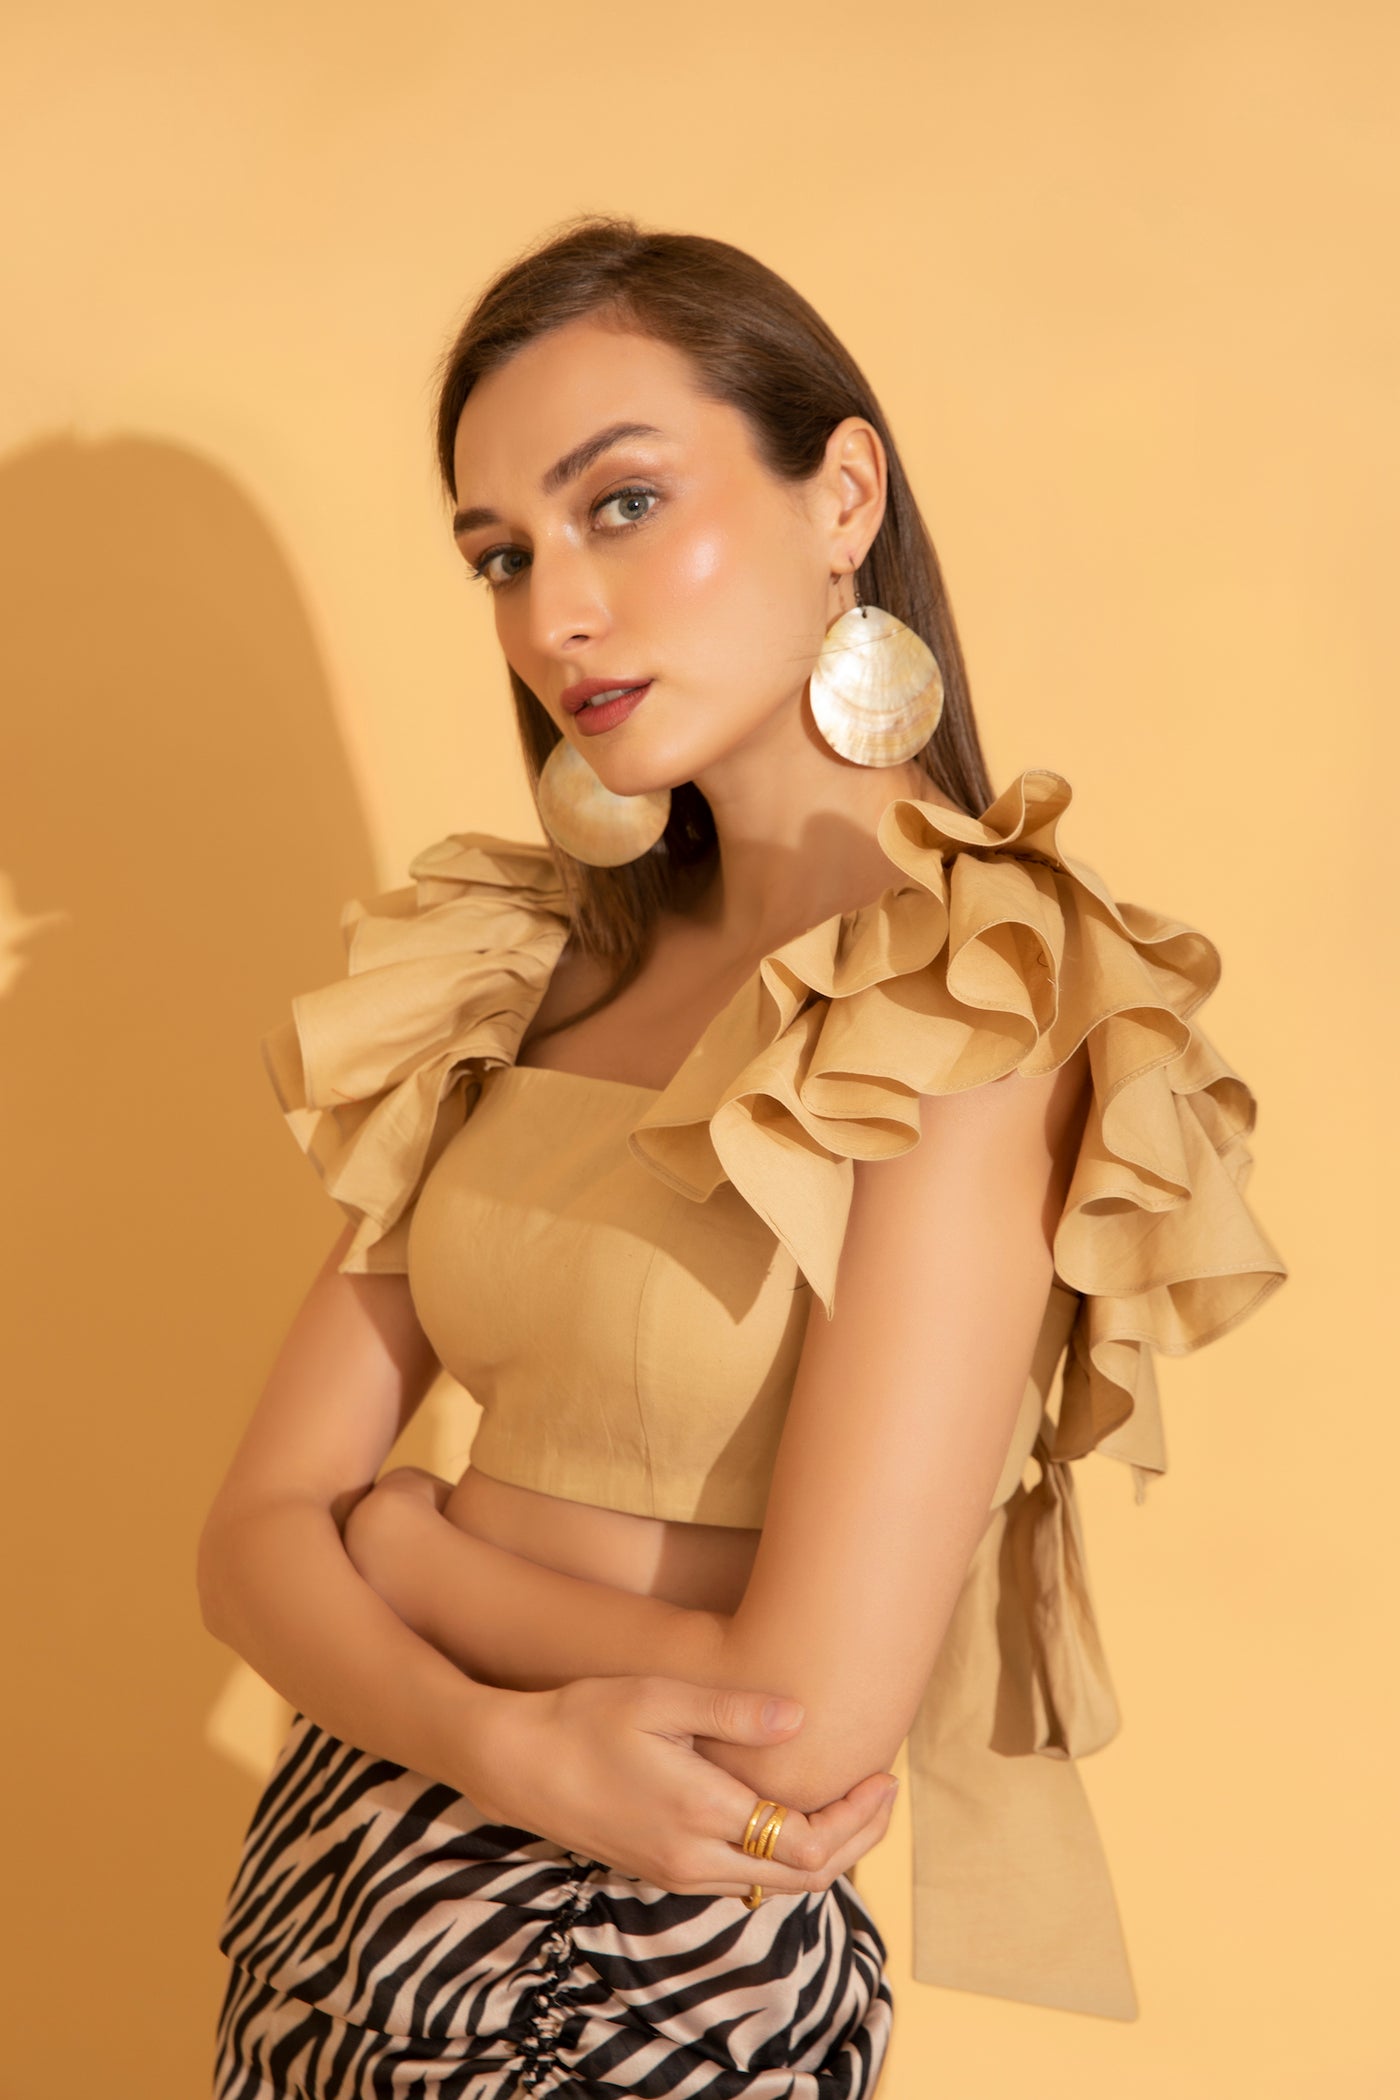 Playful and fun ruffles as seen on a beige cotton top from Torqadorn